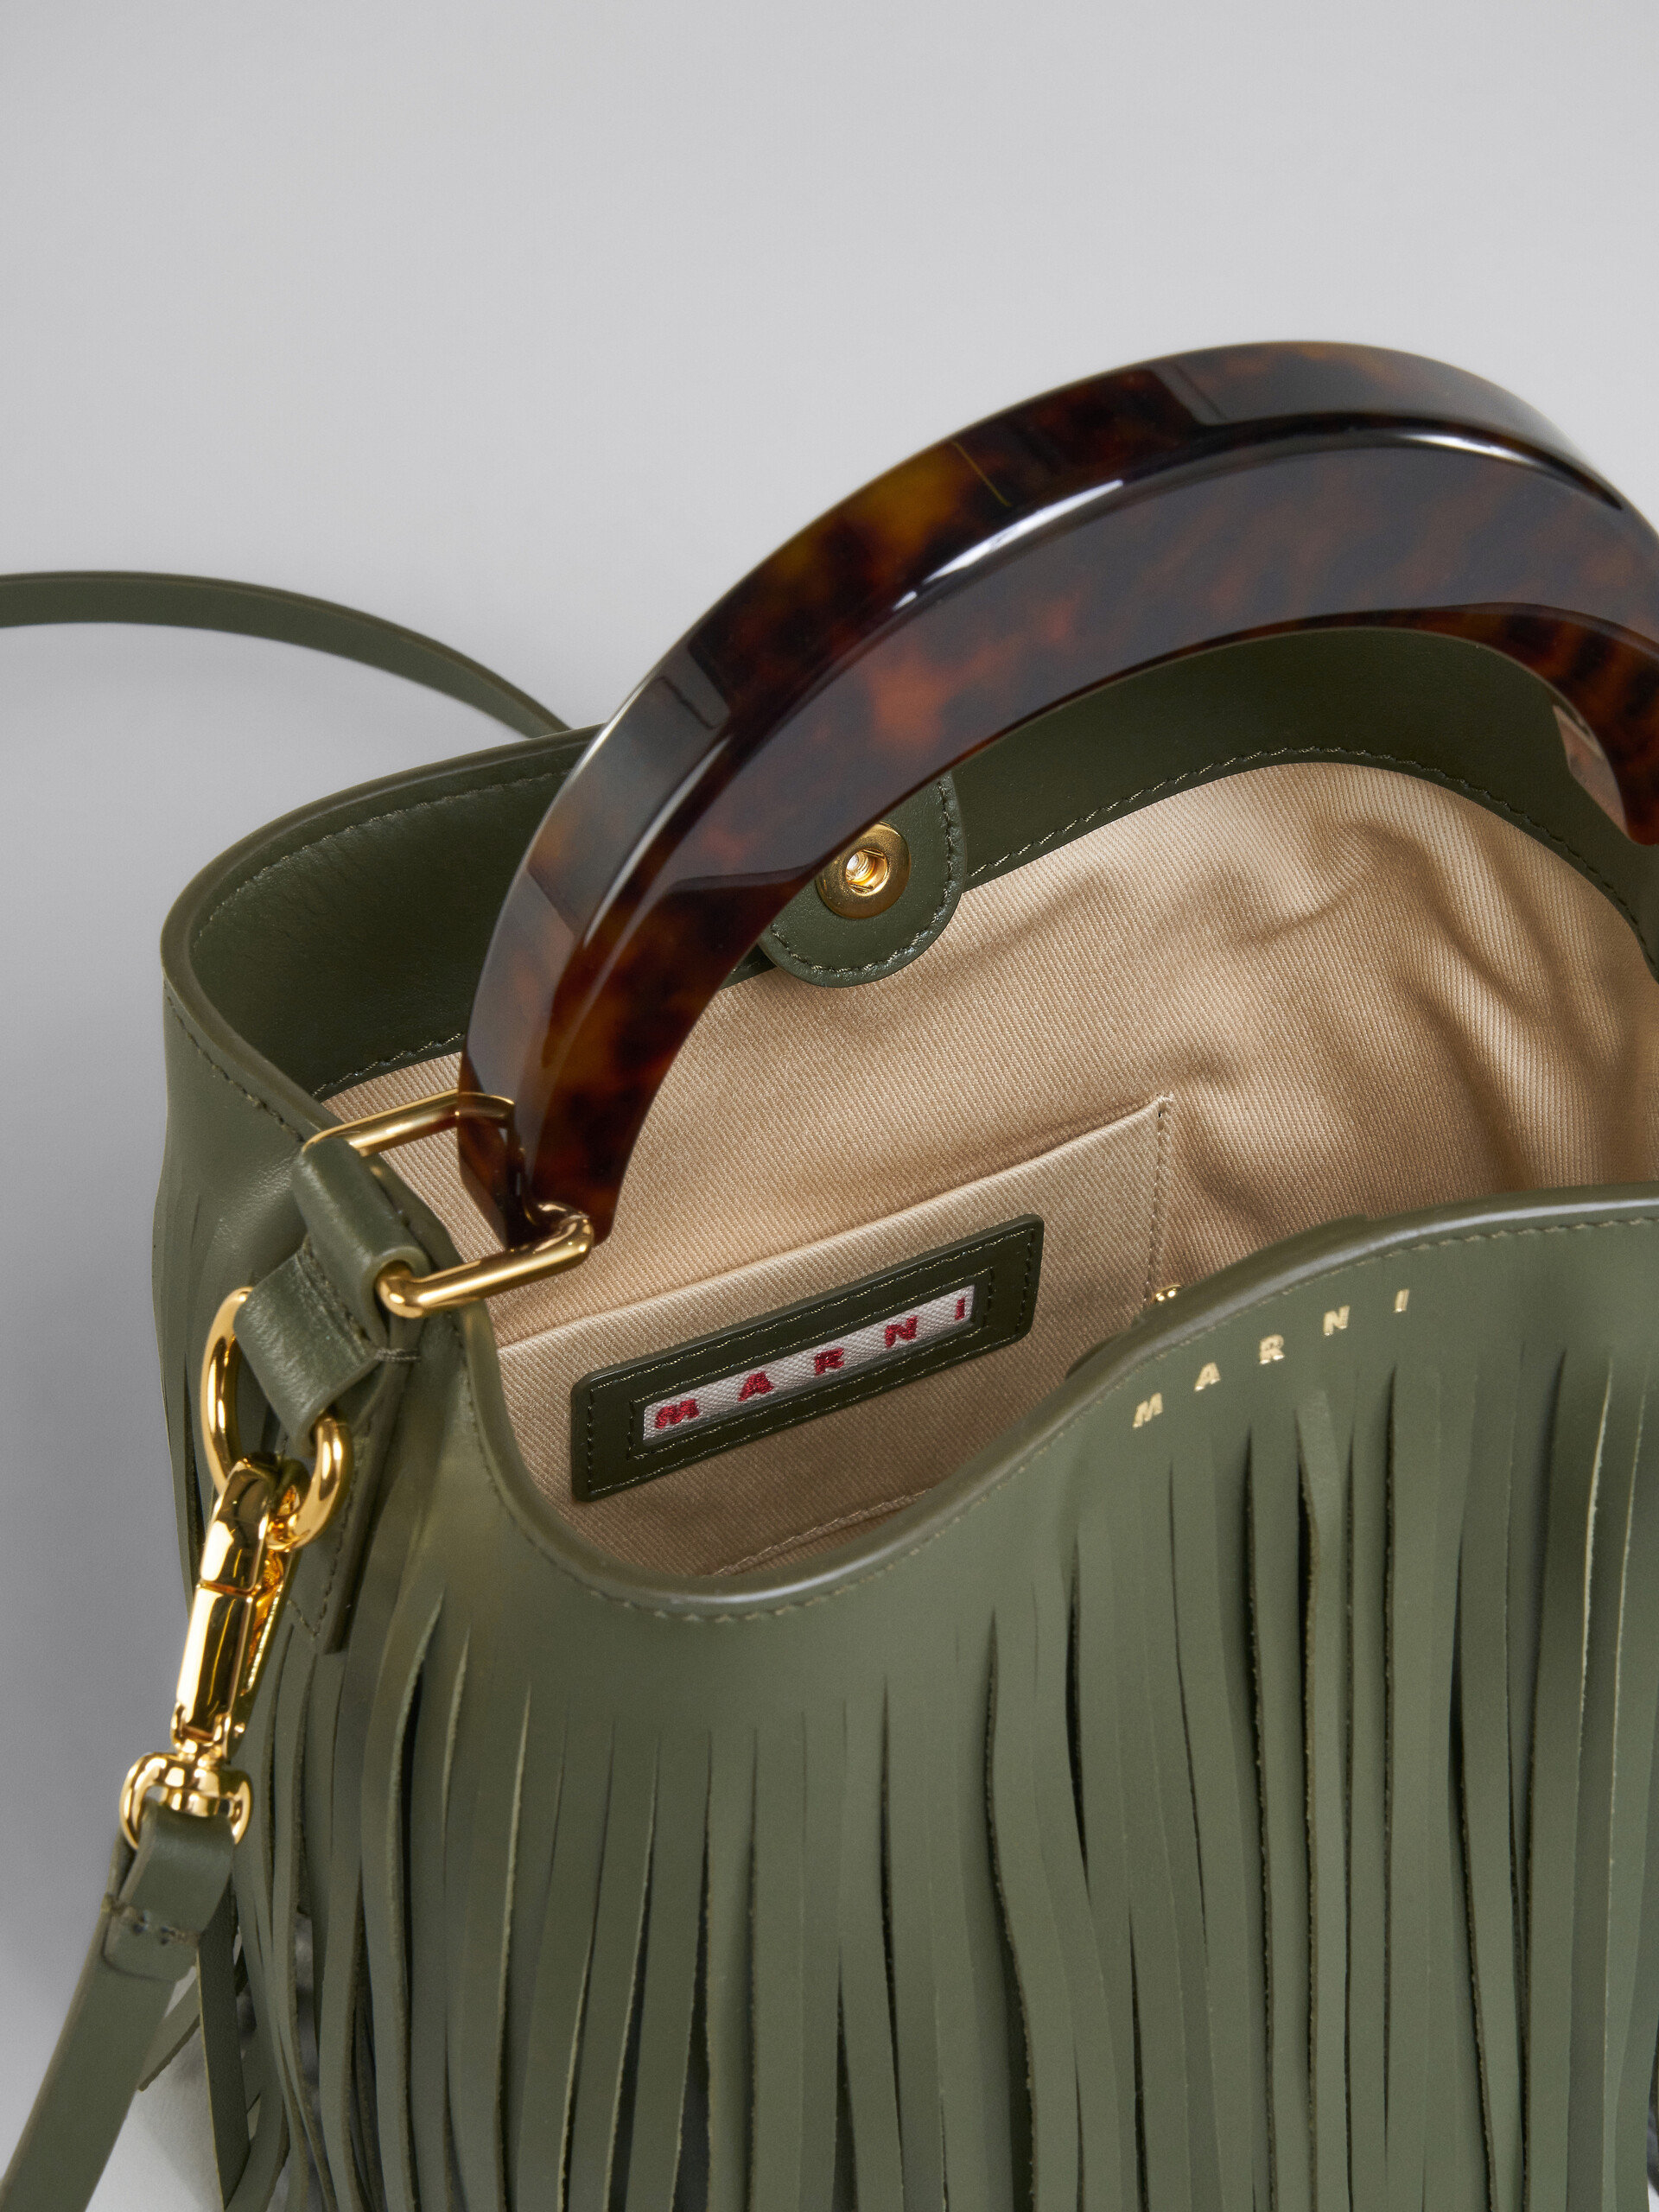 Venice Small Bucket in green leather with fringes - Shoulder Bags - Image 4